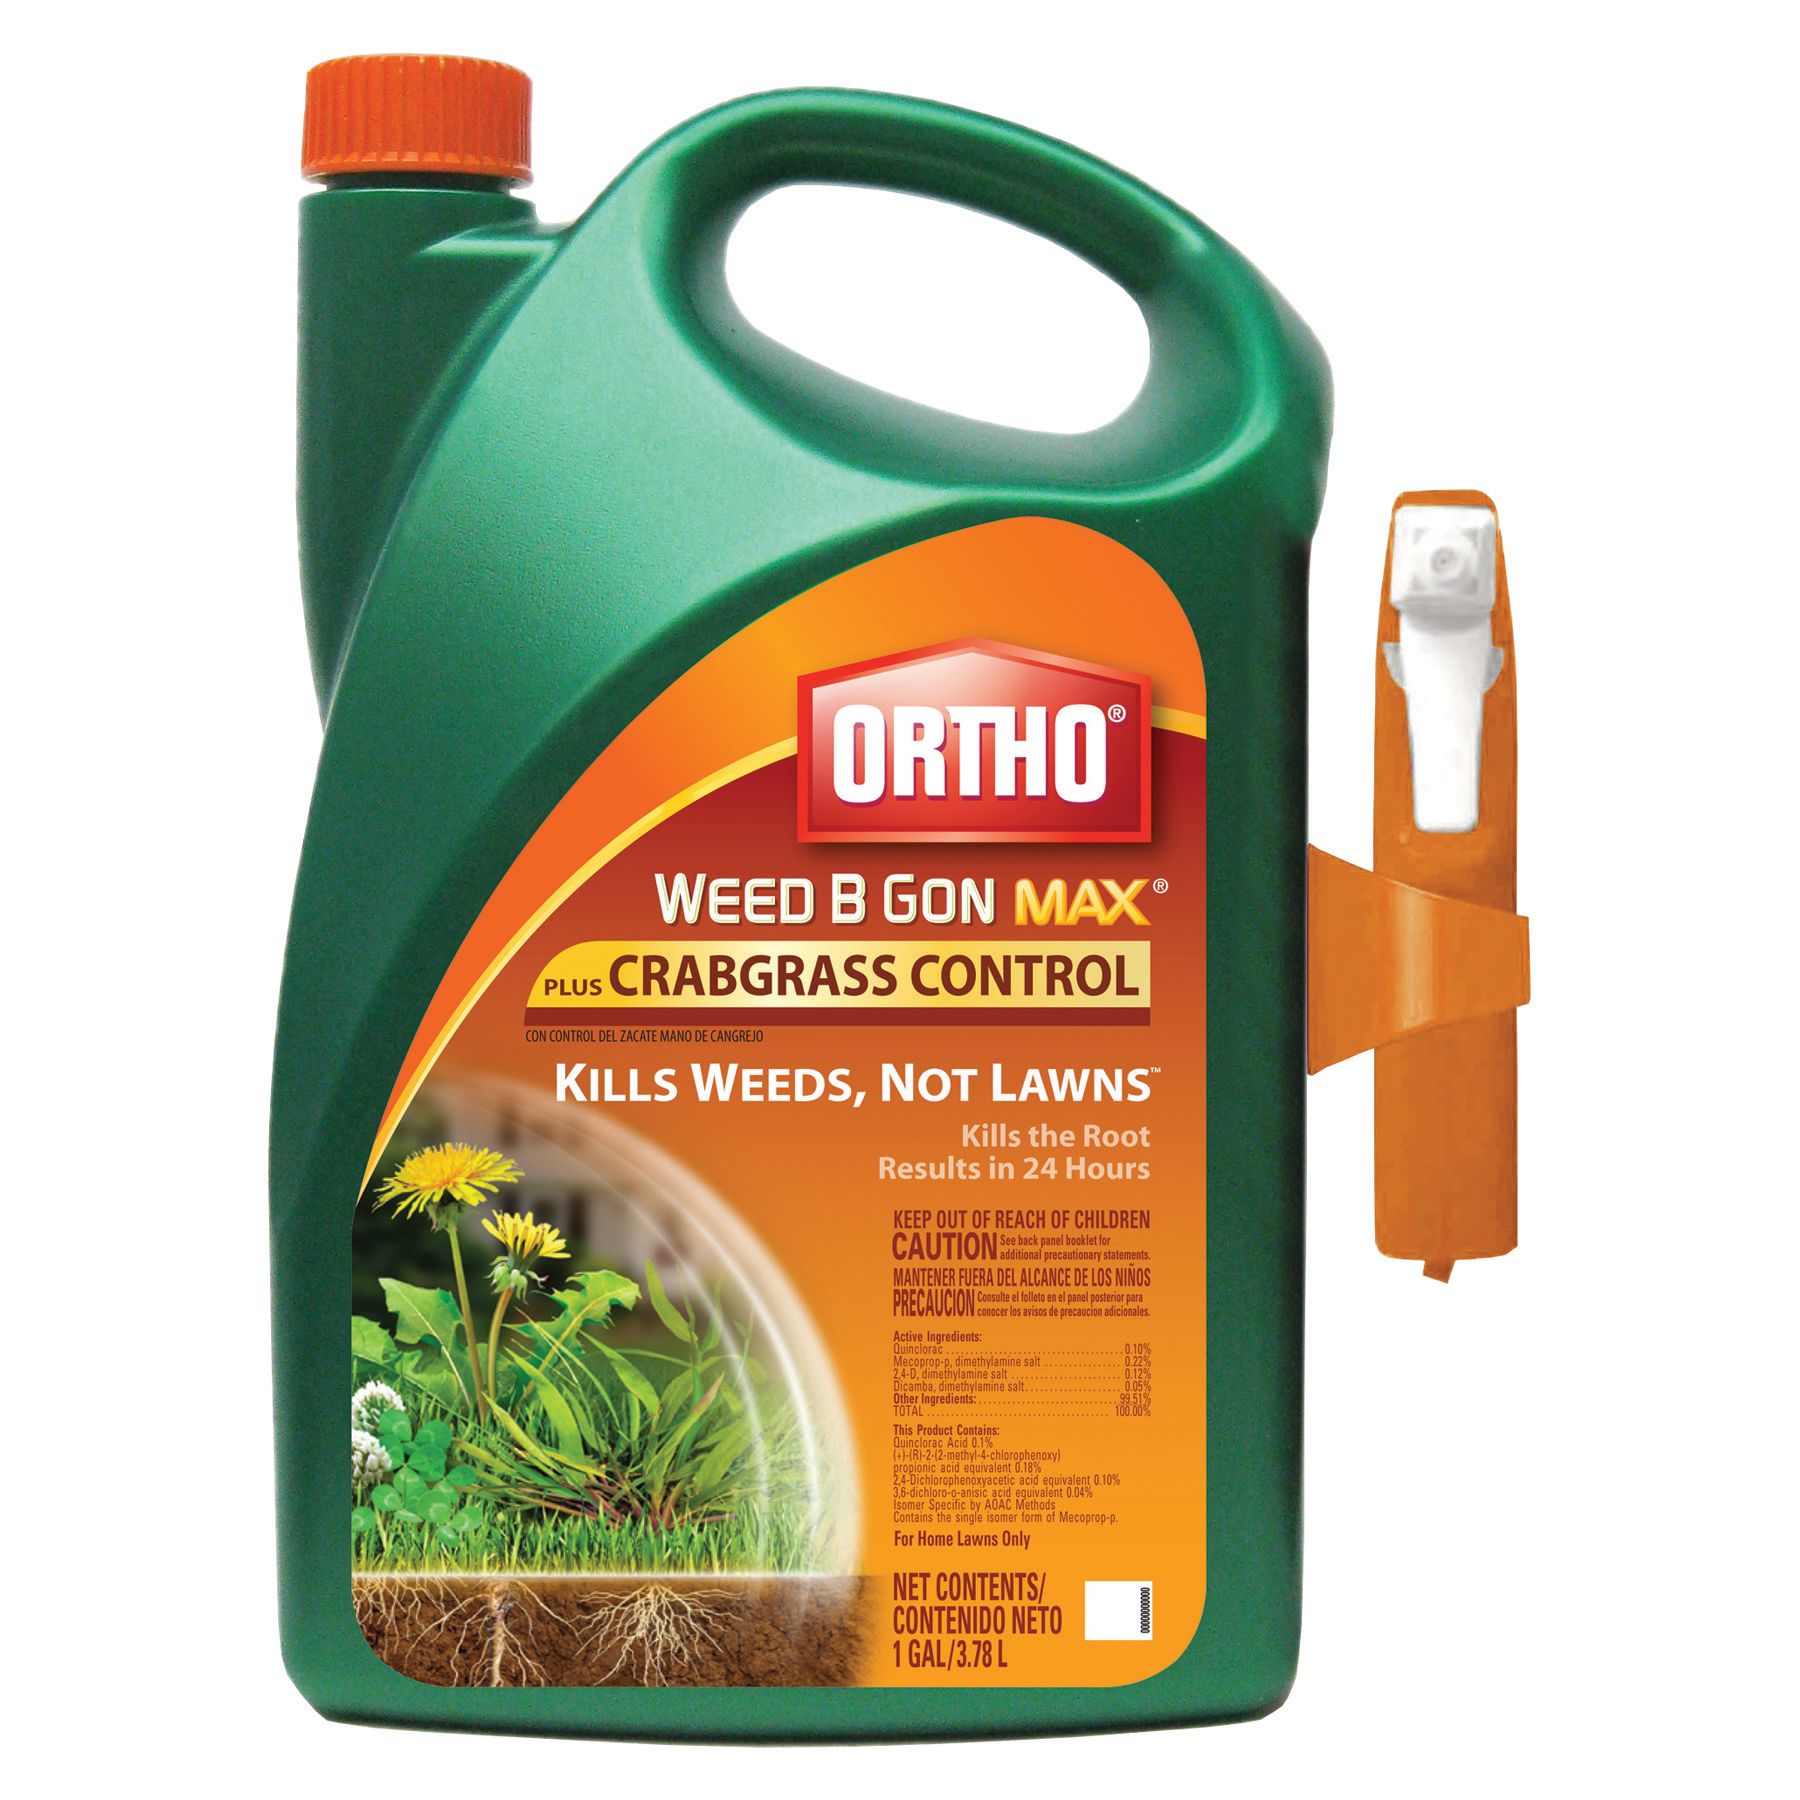 Ortho 0426010 1 gal. Weed B Gon MAX&#174; Plus Crabgrass Control